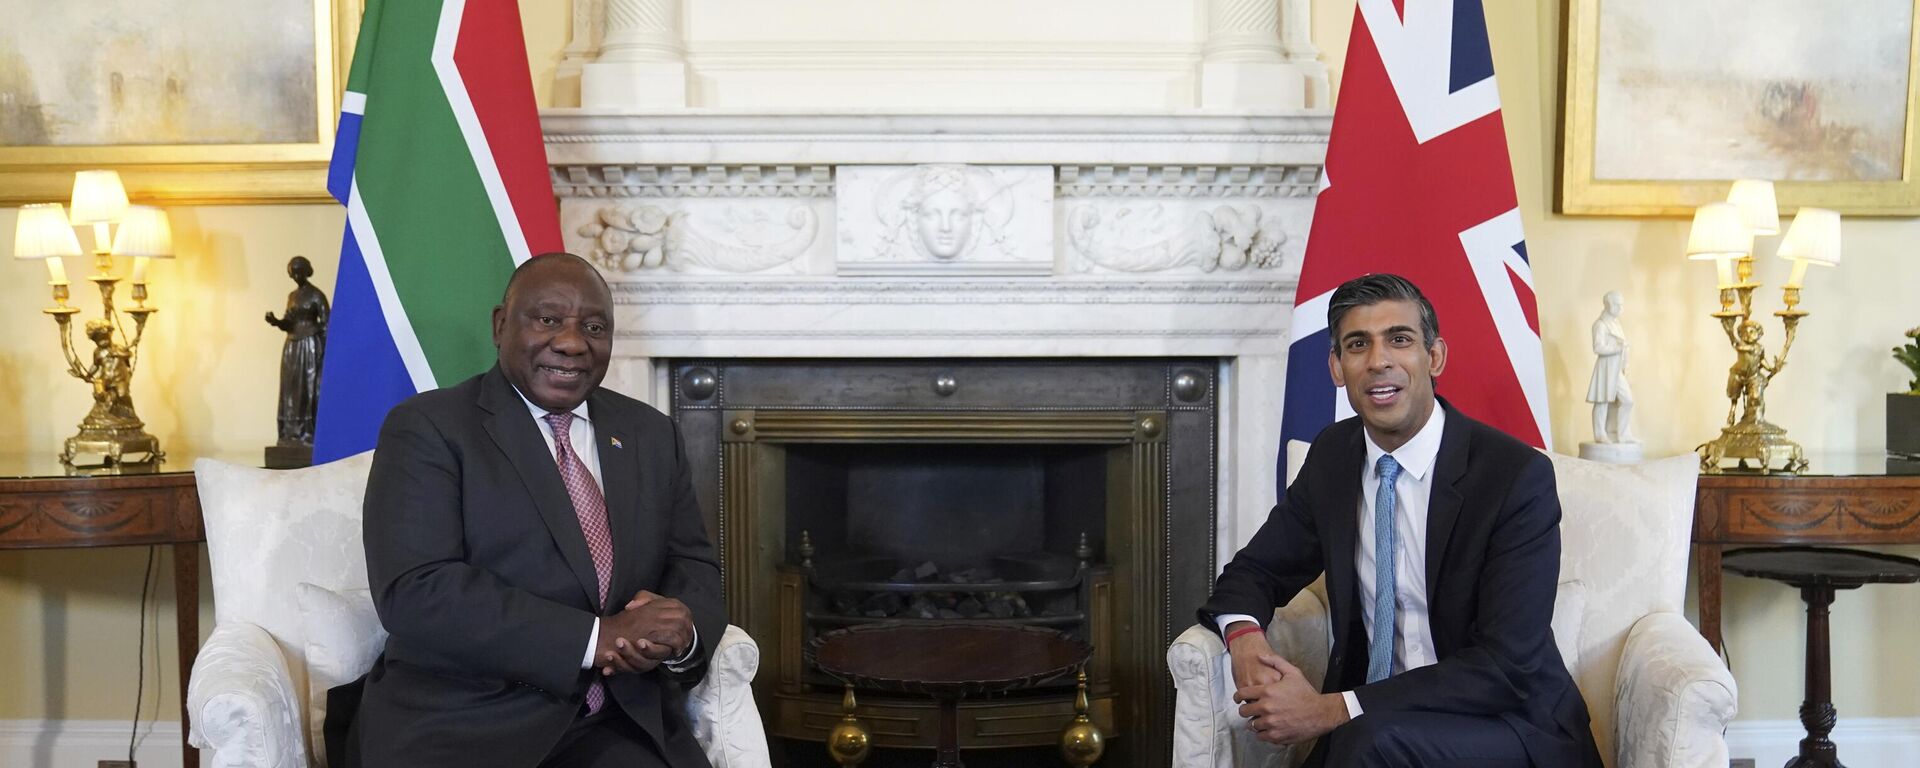 South African President Cyril Ramaphosa, left, sits with British Prime Minister Rishi Sunak at 10 Downing Street on the occasion of their bilateral meeting, in London, Wednesday, Nov. 23, 2022. - Sputnik International, 1920, 24.11.2022